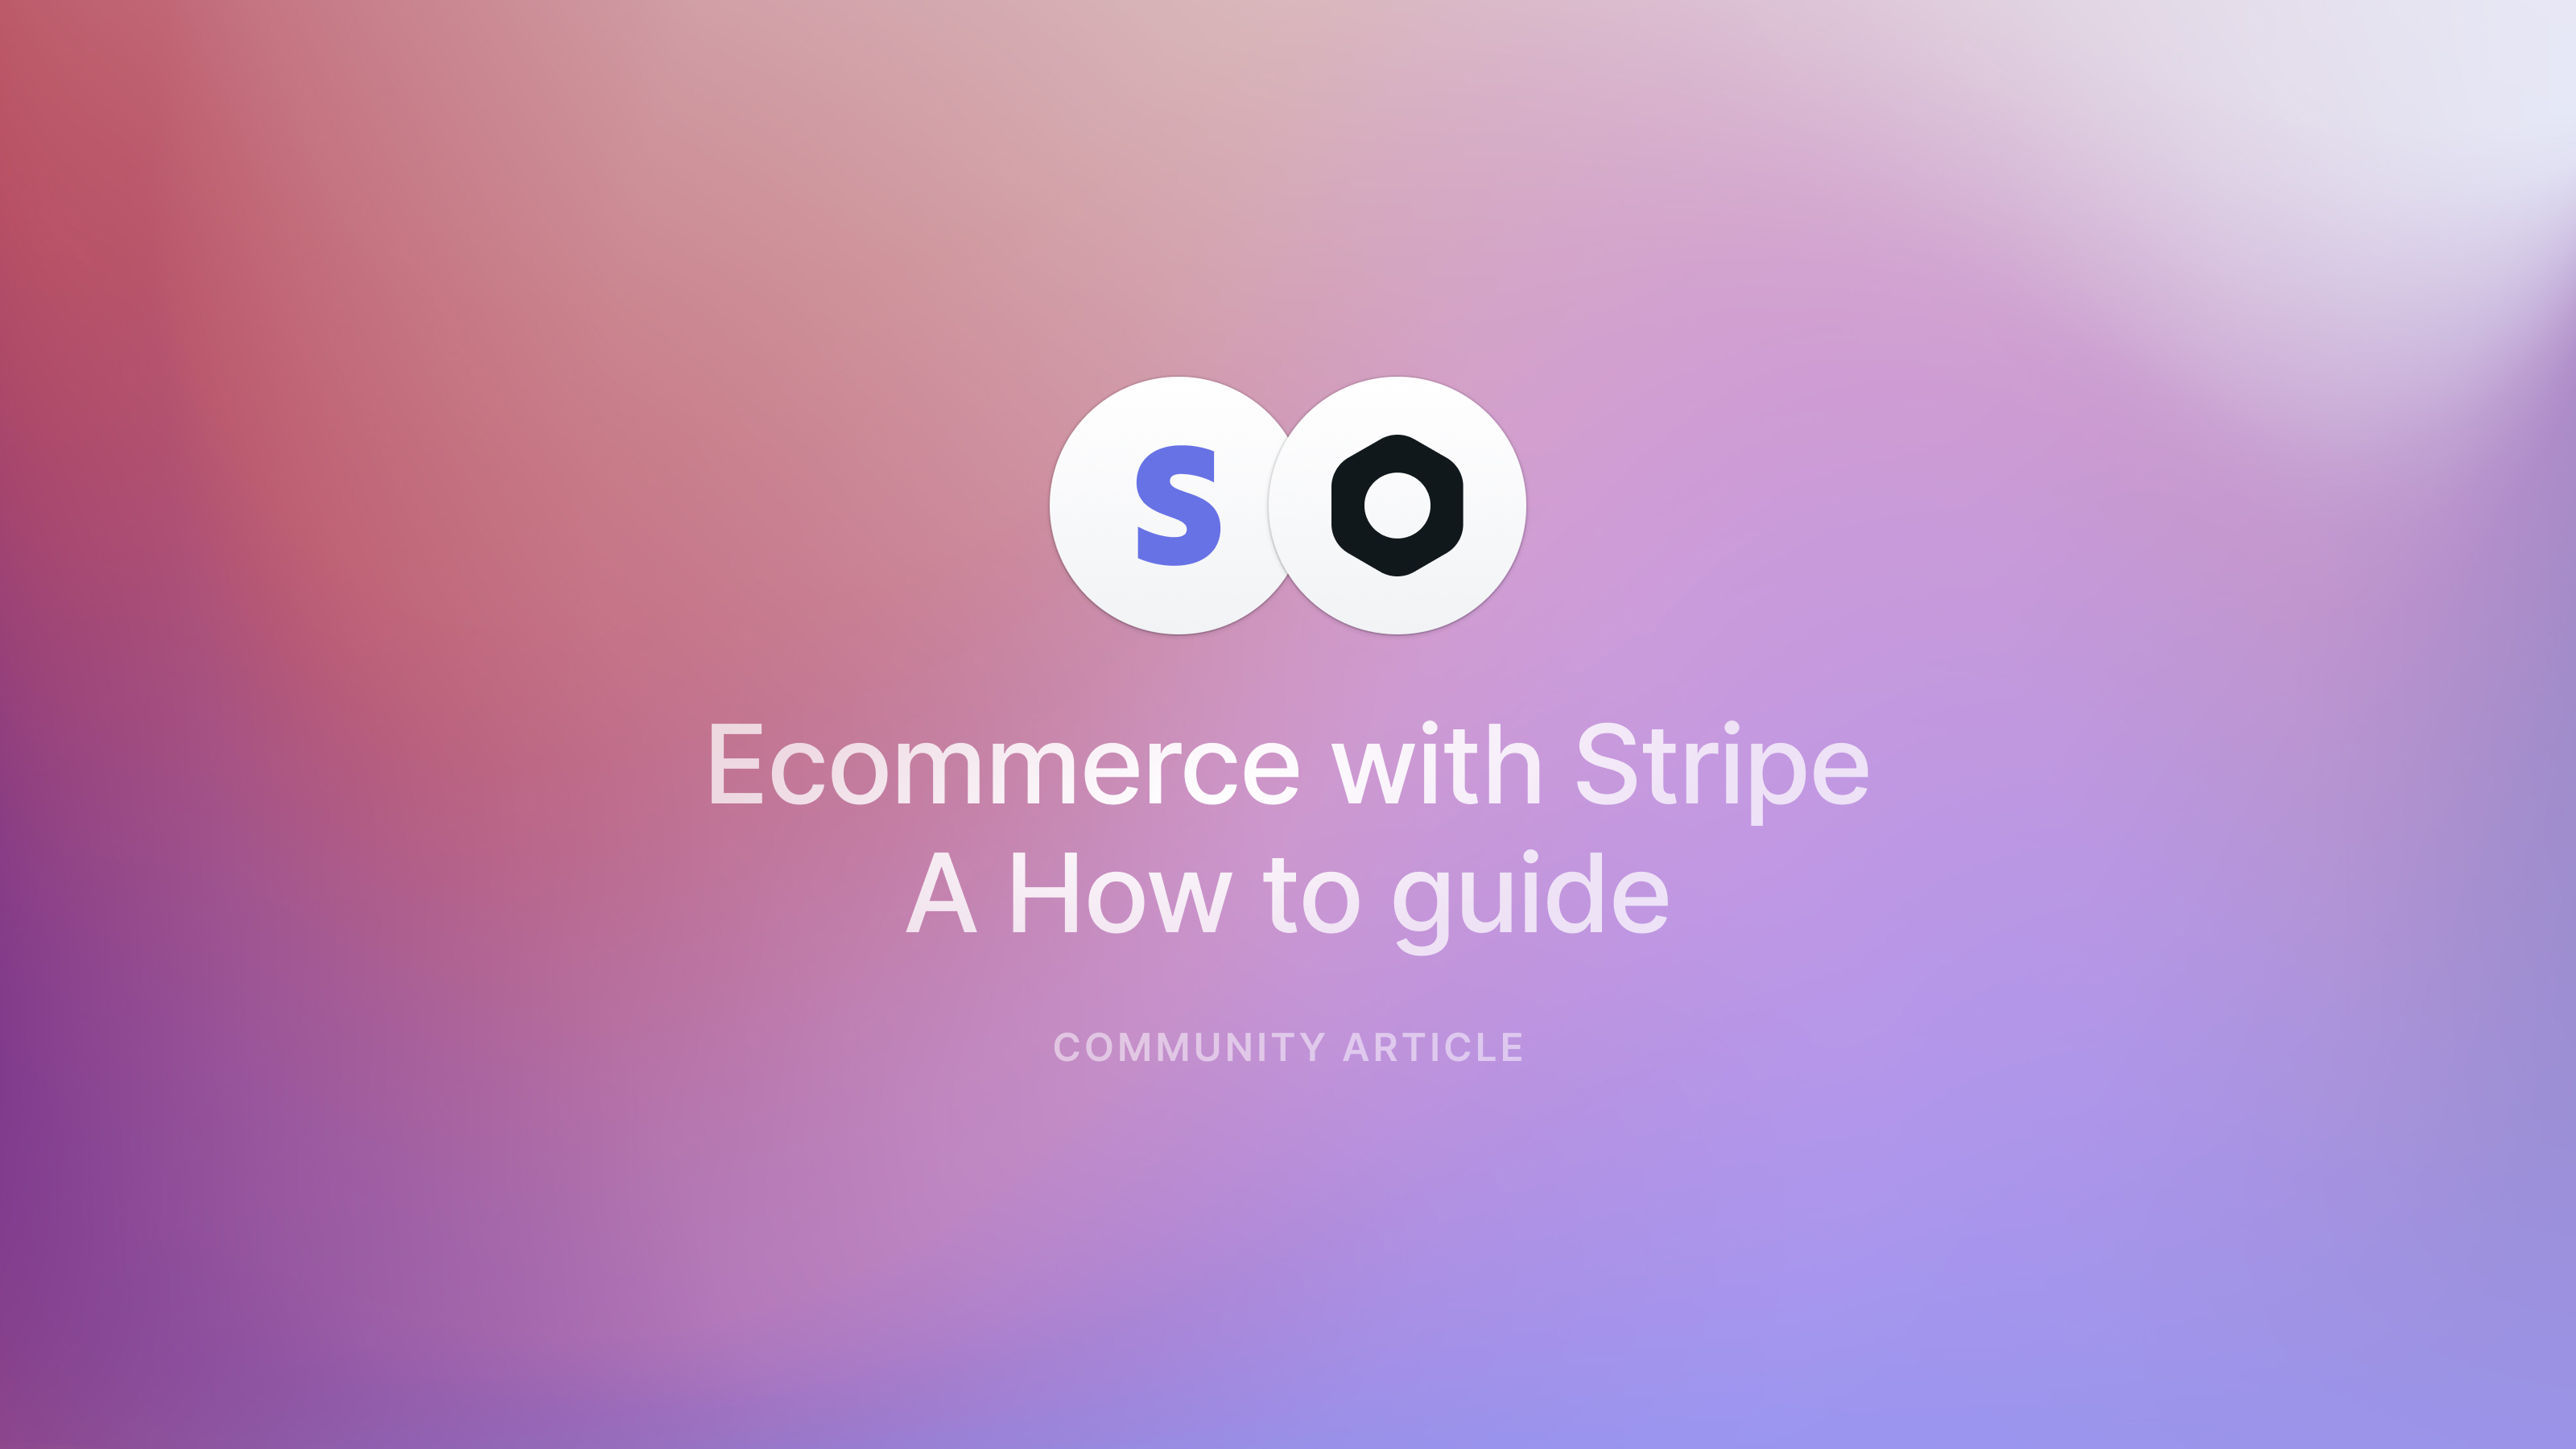 Ecommerce with Stripe: A How to guide